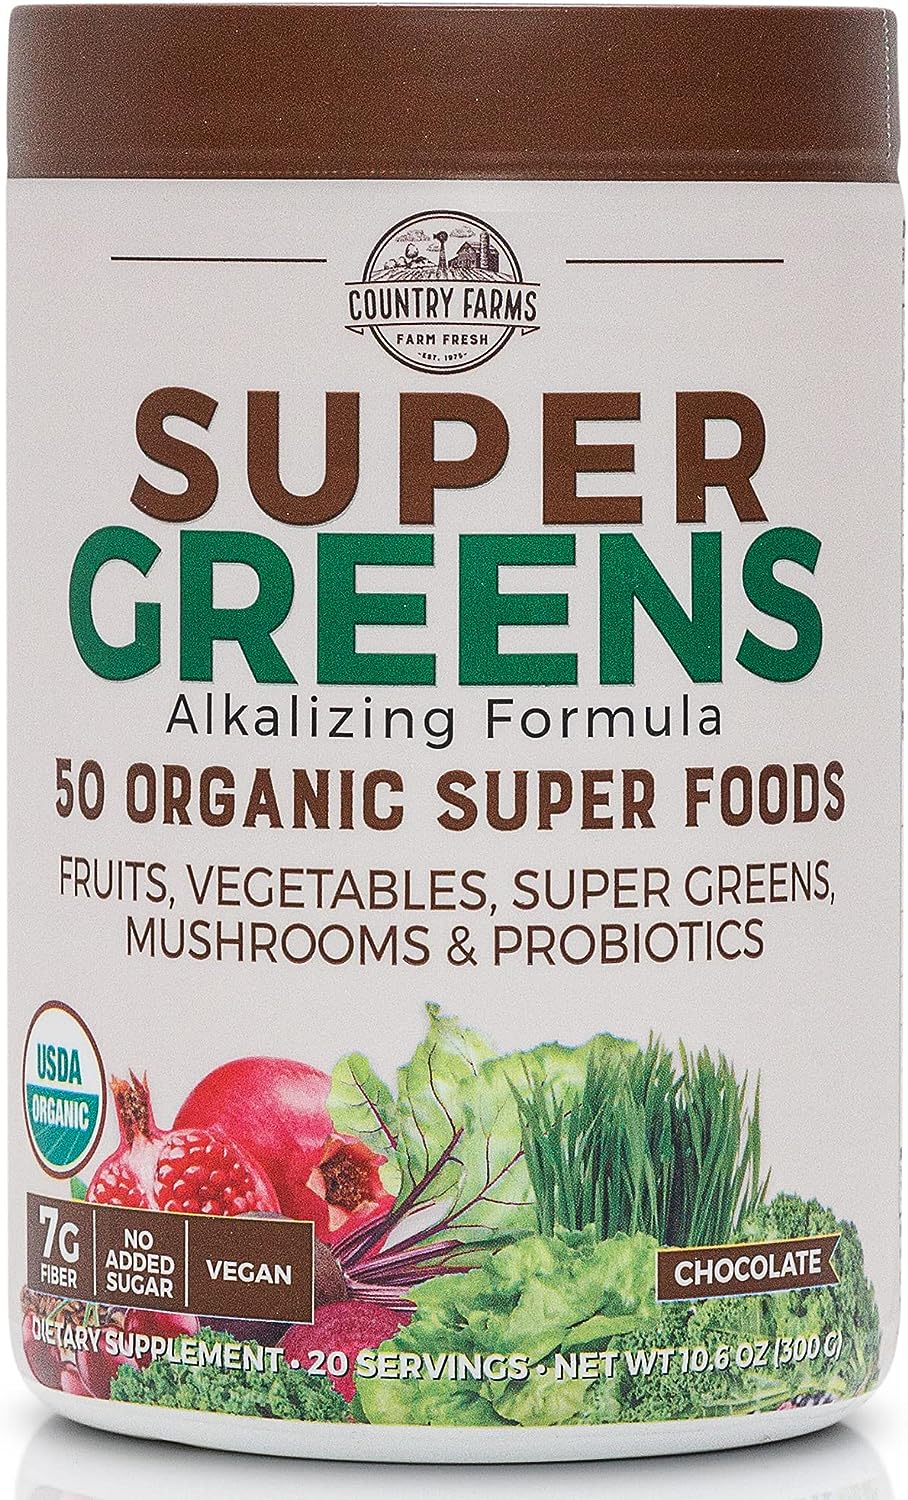 Country Farms Super Greens Flavor Review